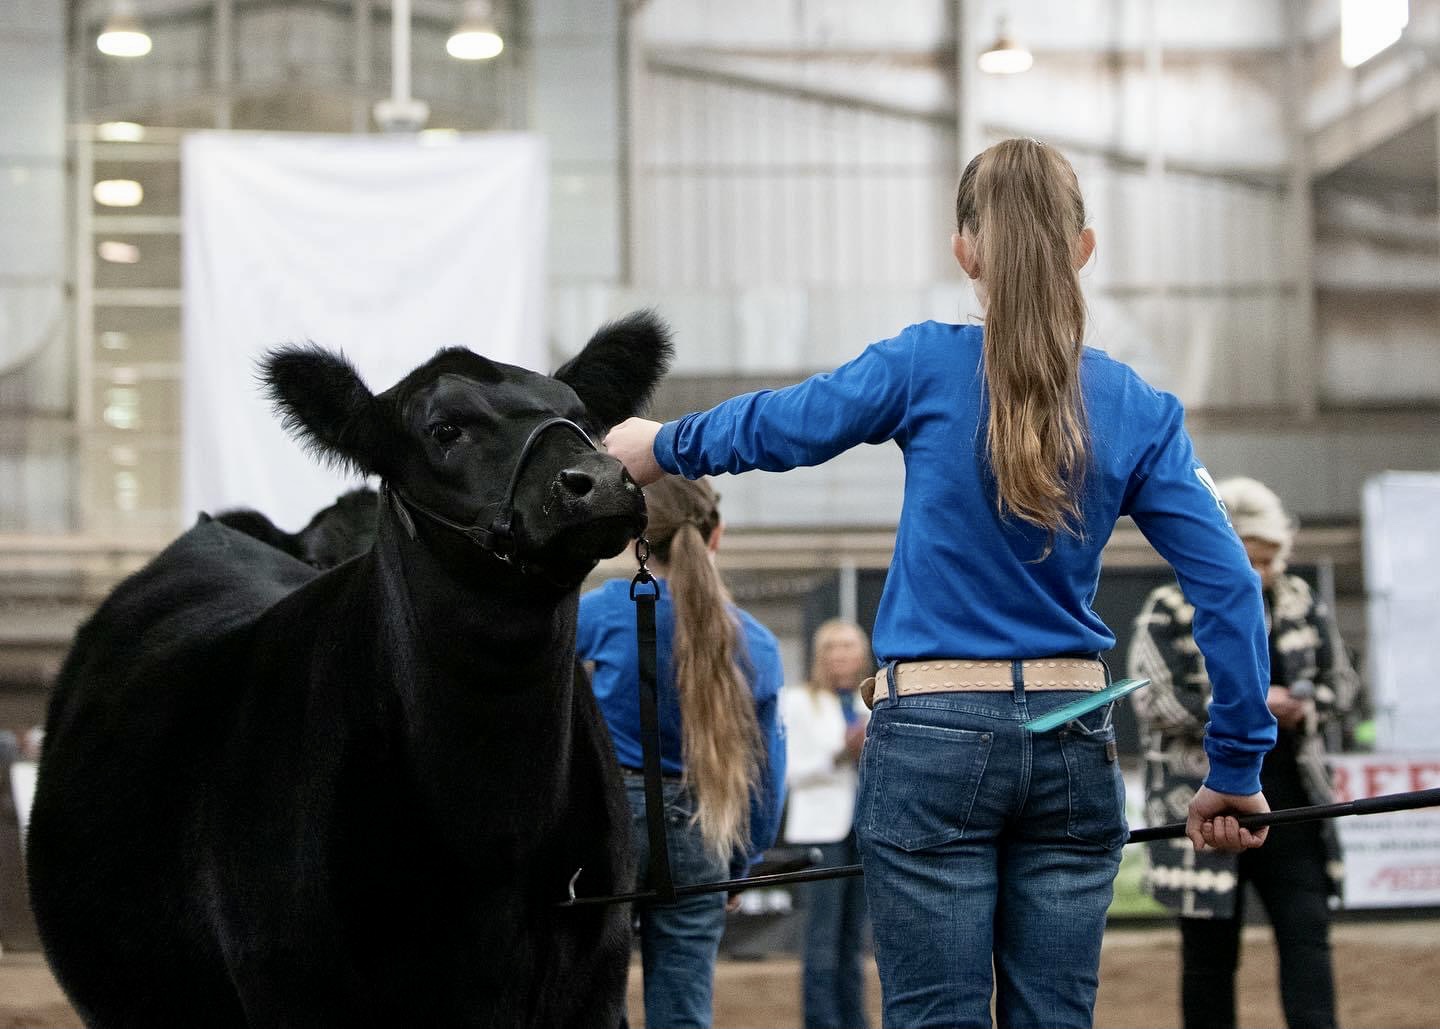 OYE Exhibitors With Youth for the Quality Care of Animals Certification Eligible for Prize Drawing from Oklahoma Beef Council